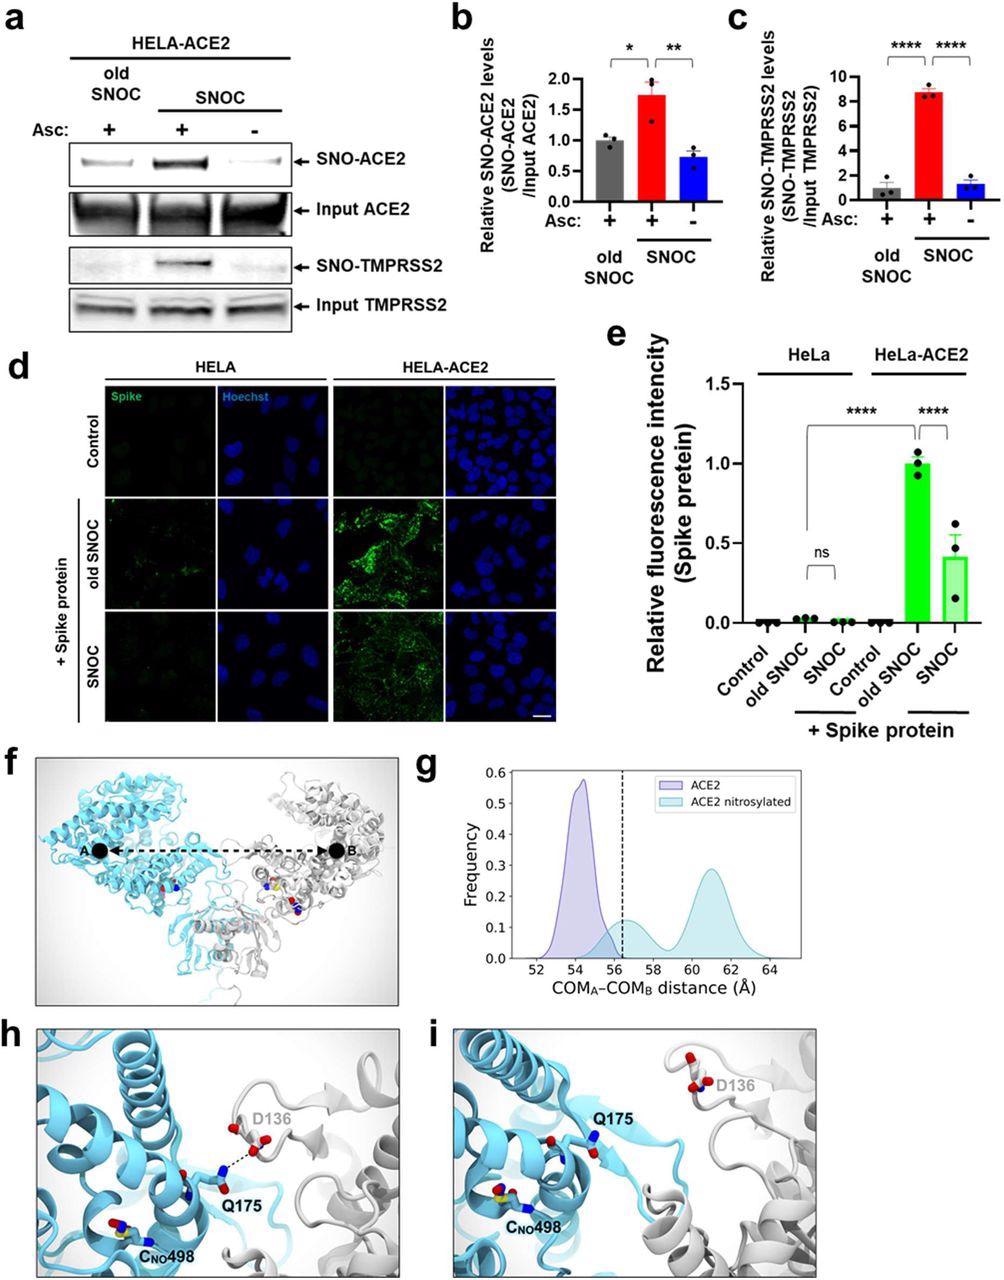 SNOC increases S-nitrosylation of ACE2 and inhibits binding of SARS-CoV-2 Spike (S) protein.a, Assay for SNO-ACE2 and SNO-TMPRSS2 in HeLa-ACE2 cells. Cells were exposed to 100 μM SNOC or, as a control, ‘old’ SNOC (from which NO had been dissipated). After 20 minutes, cell lysates were subjected to biotin-switch assay to assess S-nitrosylated (SNO-) and input (total) proteins detected by immunoblotting with cognate antibody. The ascorbate minus (Asc-) sample served as a negative control. b, c, Ratio of SNO-ACE2/input ACE2 protein and SNO-TMPRSS2/input TMPRSS2 protein. Data are mean + s.e.m., *P < 0.05, **P < 0.01, ***P < 0.001 by ANOVA with Tukey’s multiple comparisons. n = 3 biological replicates. d, HeLa and HeLa-ACE2 cells were pre-exposed to 100 μM SNOC or old SNOC. After 30 minutes, 10 μg/ml of purified recombinant SARS-CoV-2 Spike (S1+S2) protein was incubated with the cells. After 1 h, cells were fixed with 4% PFA for 15 minutes, and bound Spike protein was detected by anti-Spike protein antibody; nuclei stained with 1 μg/ml Hoechst. Cells were imaged by confocal fluorescence microscopy. Scale bar, 20 μm. e, Quantification of relative fluorescence intensity. Data are mean + s.e.m., ****P < 0.0001 by ANOVA with Tukey’s multiple comparisons. n = 3 biological replicates. f, Molecular representation of the S-nitrosylated-ACE2/RBD model upon transient detachment at the level of the peptidase domain dimeric interface. SNO-Cys261 and SNO-Cys498 are shown with Van der Waals spheres. The black dots indicate qualitative placement of centers of mass (COM) for each ACE2 protomer, and the dashed arrow represents the distance between COMs. Spike’s RBDs and N-glycans, which were included in the simulation, are hidden for image clarity. SpBD, Spike binding domain; CLD, collectrin-like domain; PD, peptidase domain. g, Distribution of the distance between COMs from molecular dynamics simulations of WT ACE2/RBD (purple) vs. nitrosylated-ACE2/RBD (cyan). Dashed black line at approximately 56.5 Å indicates the reference distance between COMs calculated from the cryo-EM structure (PDB: 6M17). S-Nitrosylated-ACE2/RBD shows an overall larger distance between COMs with a bimodal distribution. h, Close-up image illustrating Q175A to D136B interaction present in starting conformations of the S-nitrosylated-ACE2 system. i, Close-up image illustrating the disruption of the interaction between Q175A and D136B occurring along the dynamics of the S-nitrosylated-ACE2 system.